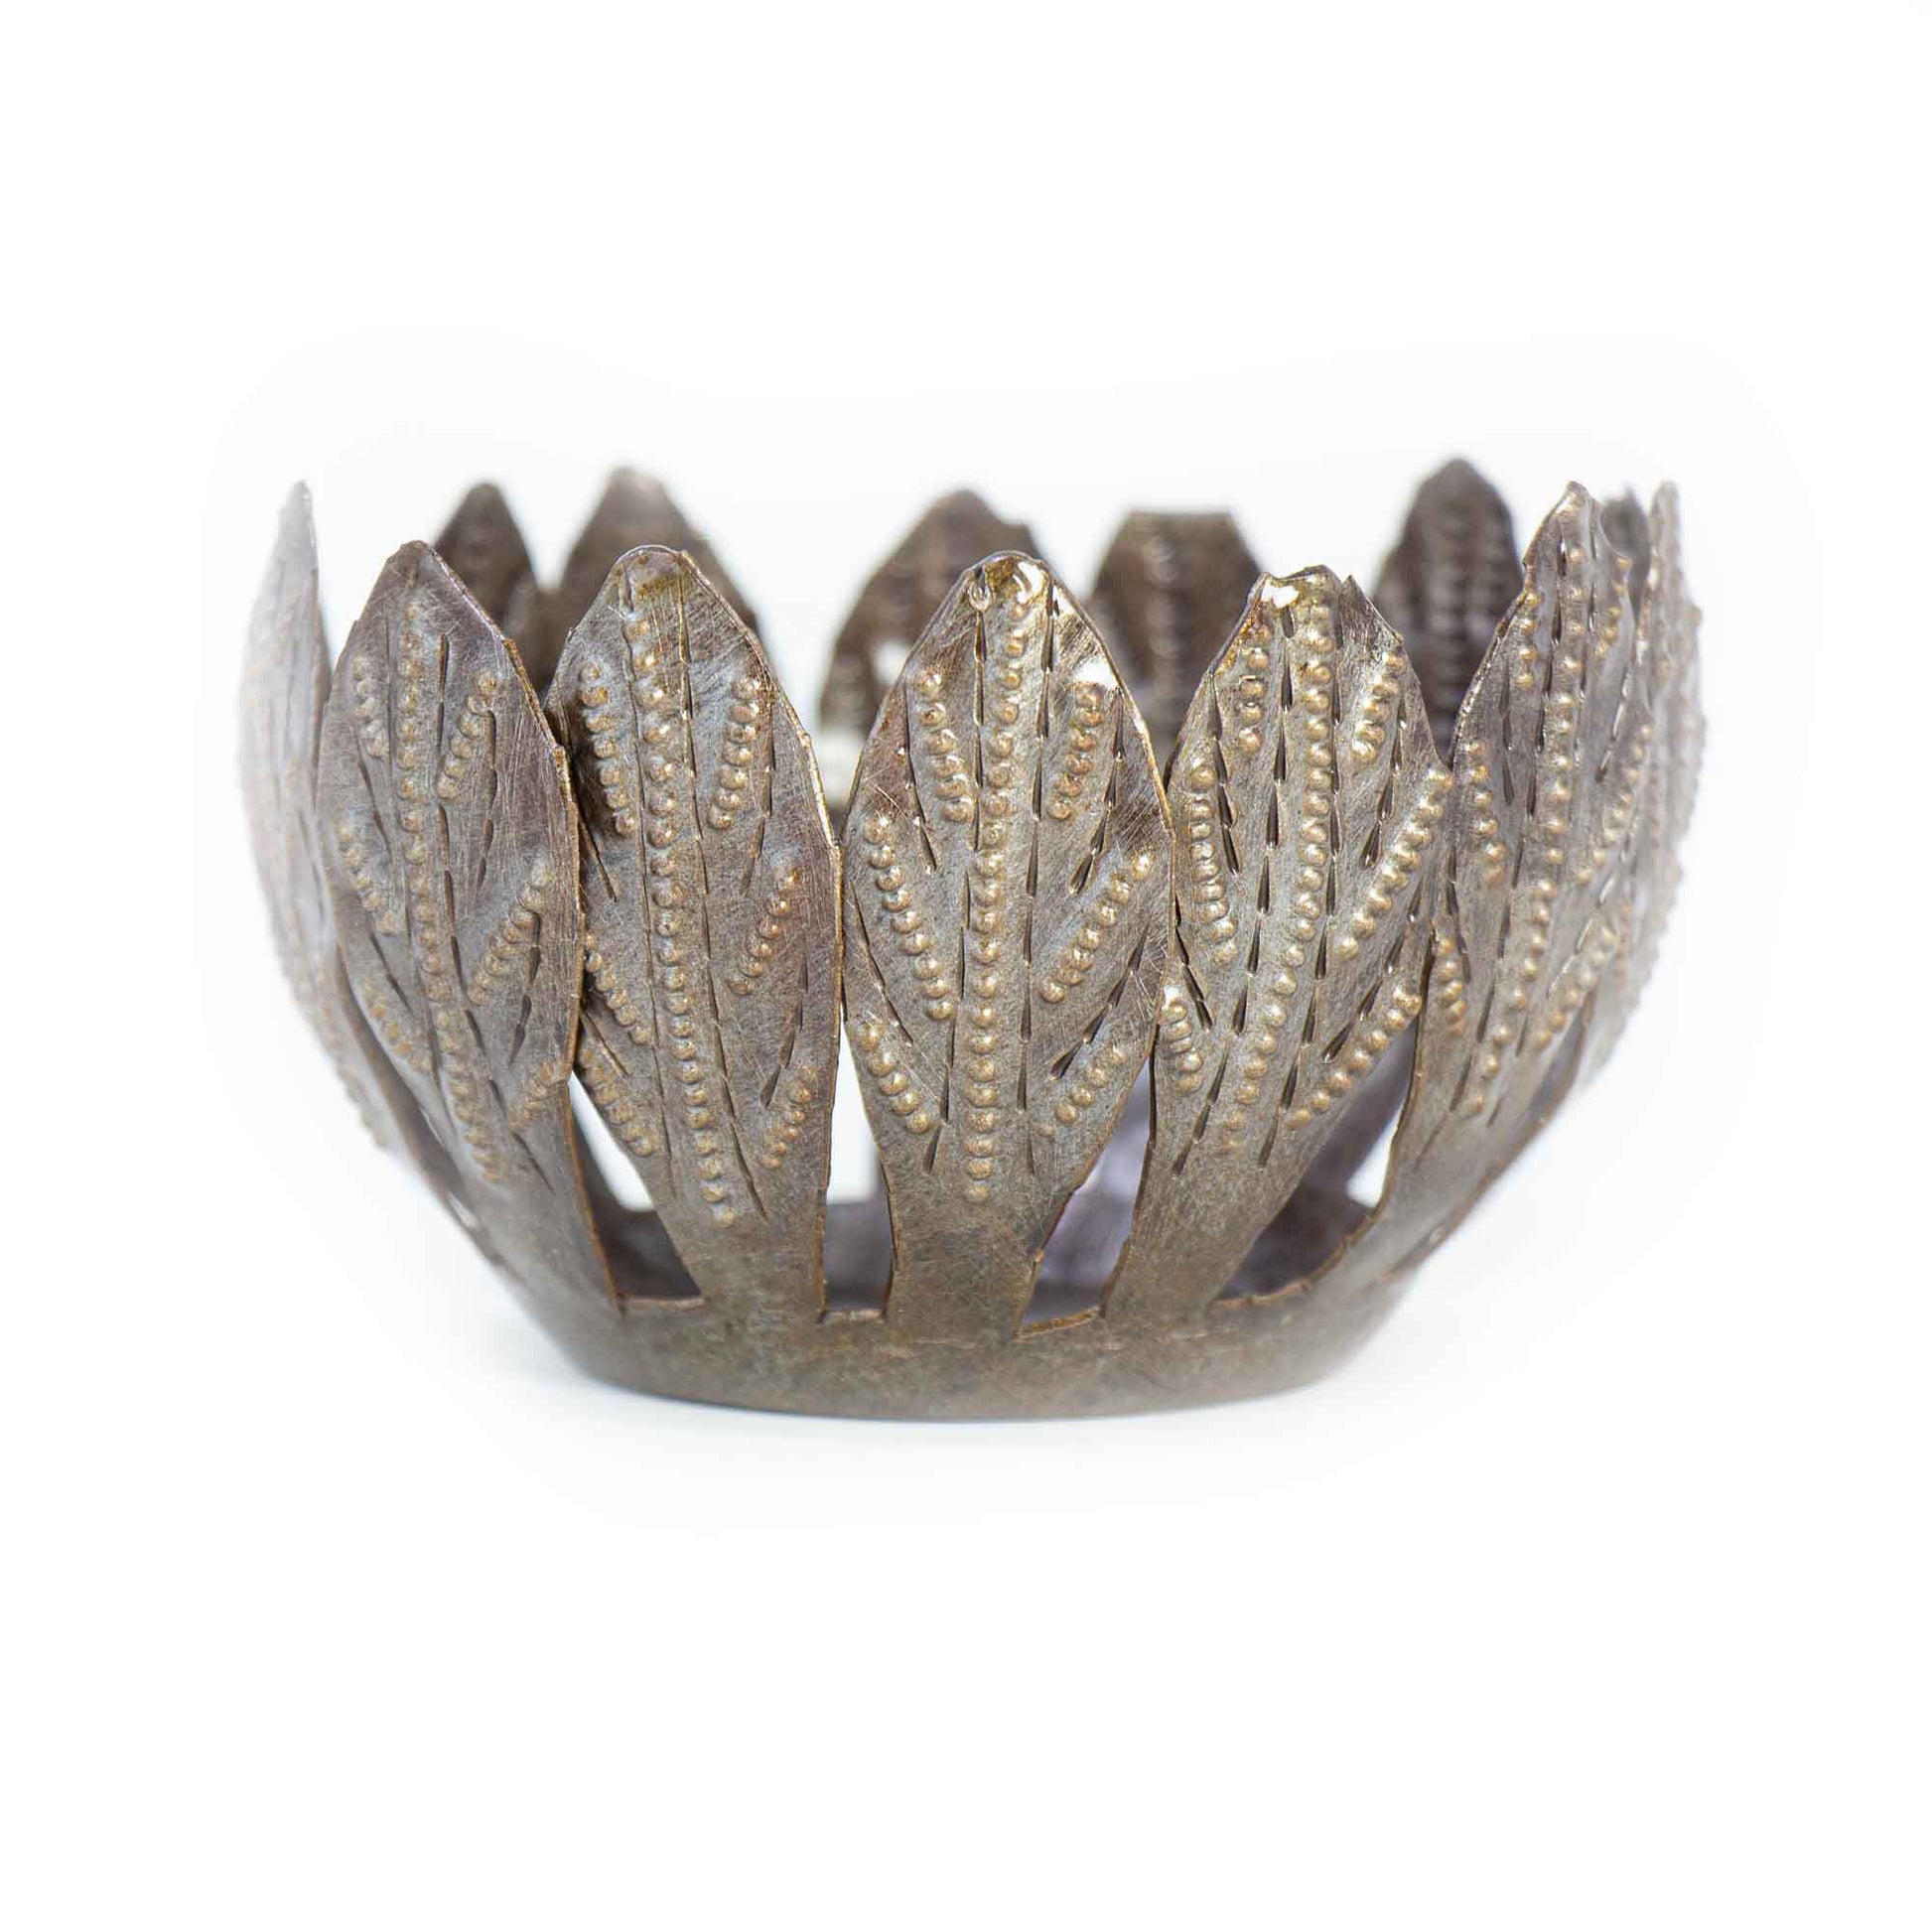 Mango Leaf Haitian Metal Drum Votive by Global Crafts Wholesale - Lotus and Willow